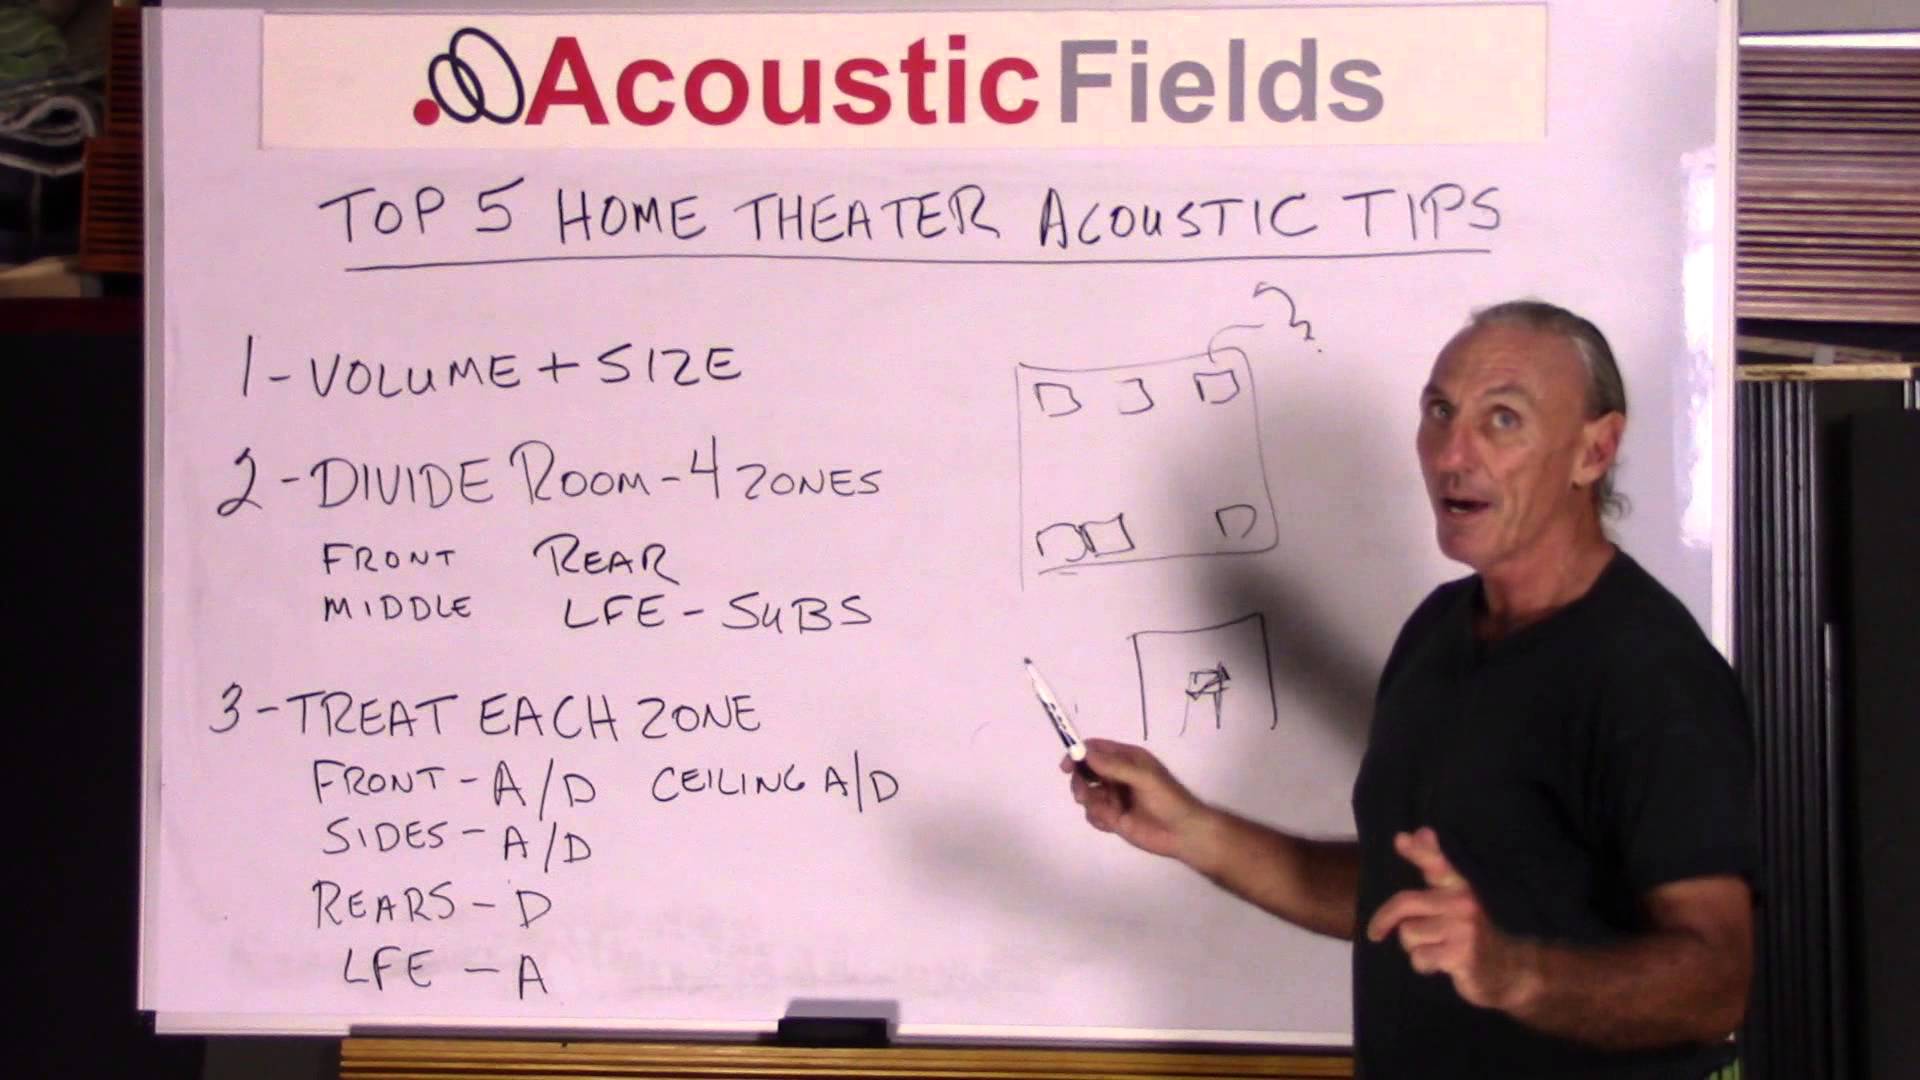 Top 5 home theater acoustic tips